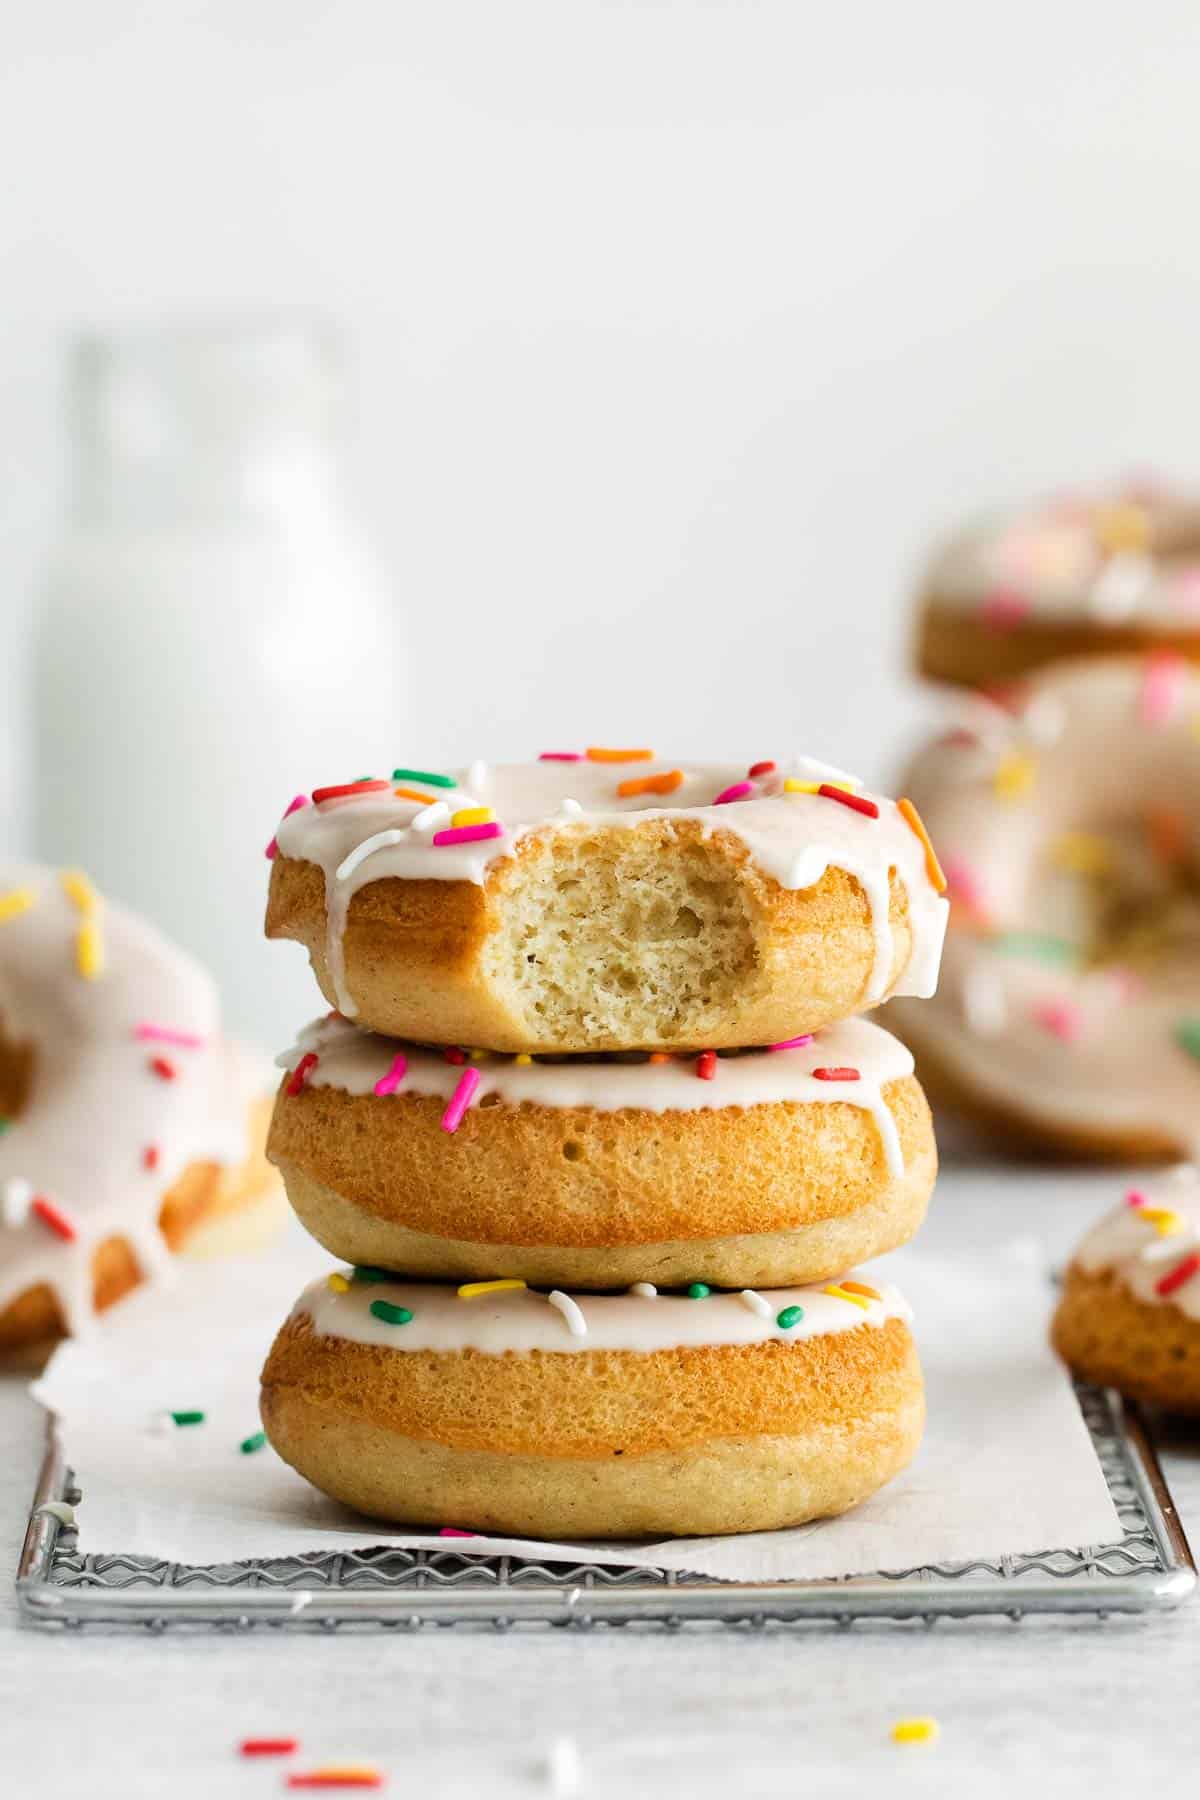 Gluten-free baked donuts stacked on top of each other